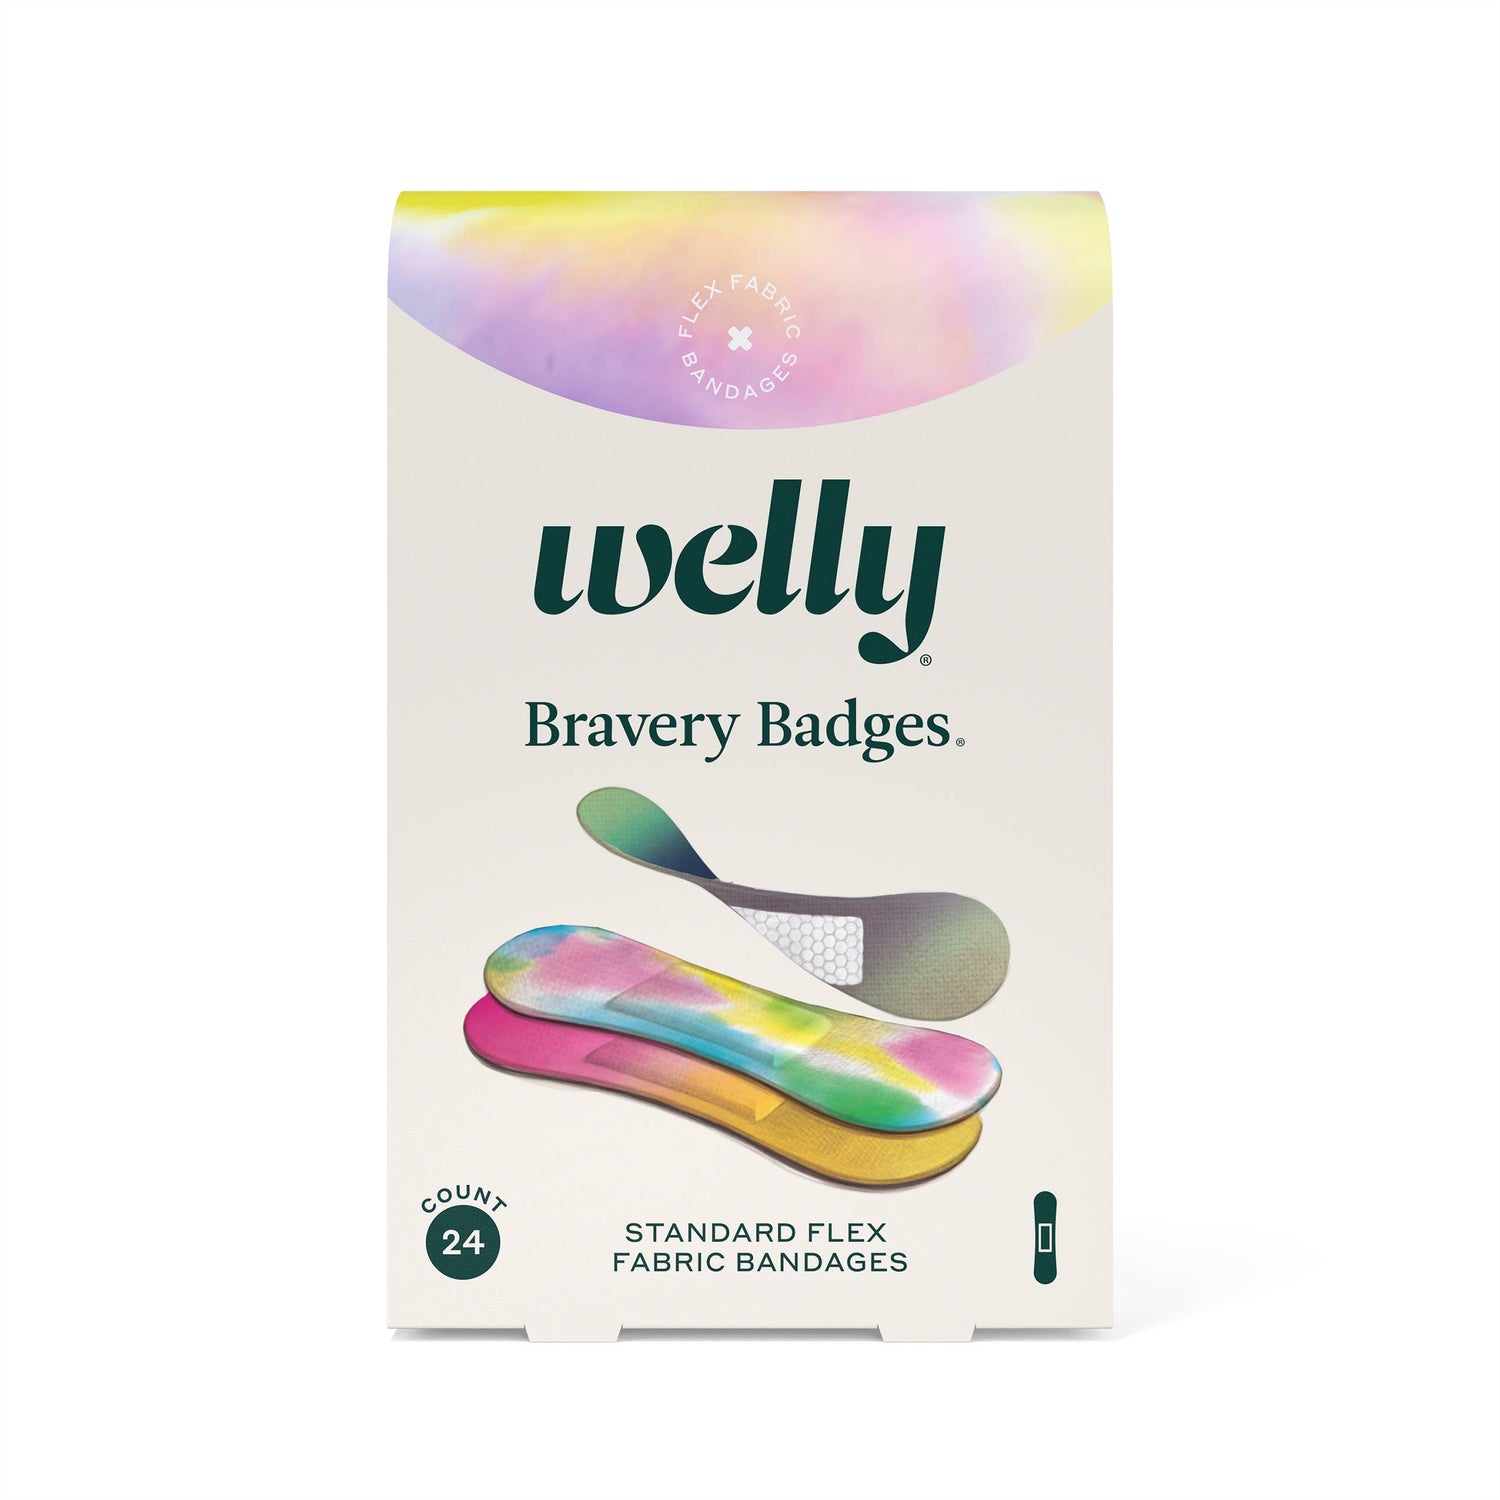 Colorwash Bravery Badges bandage pack by Welly